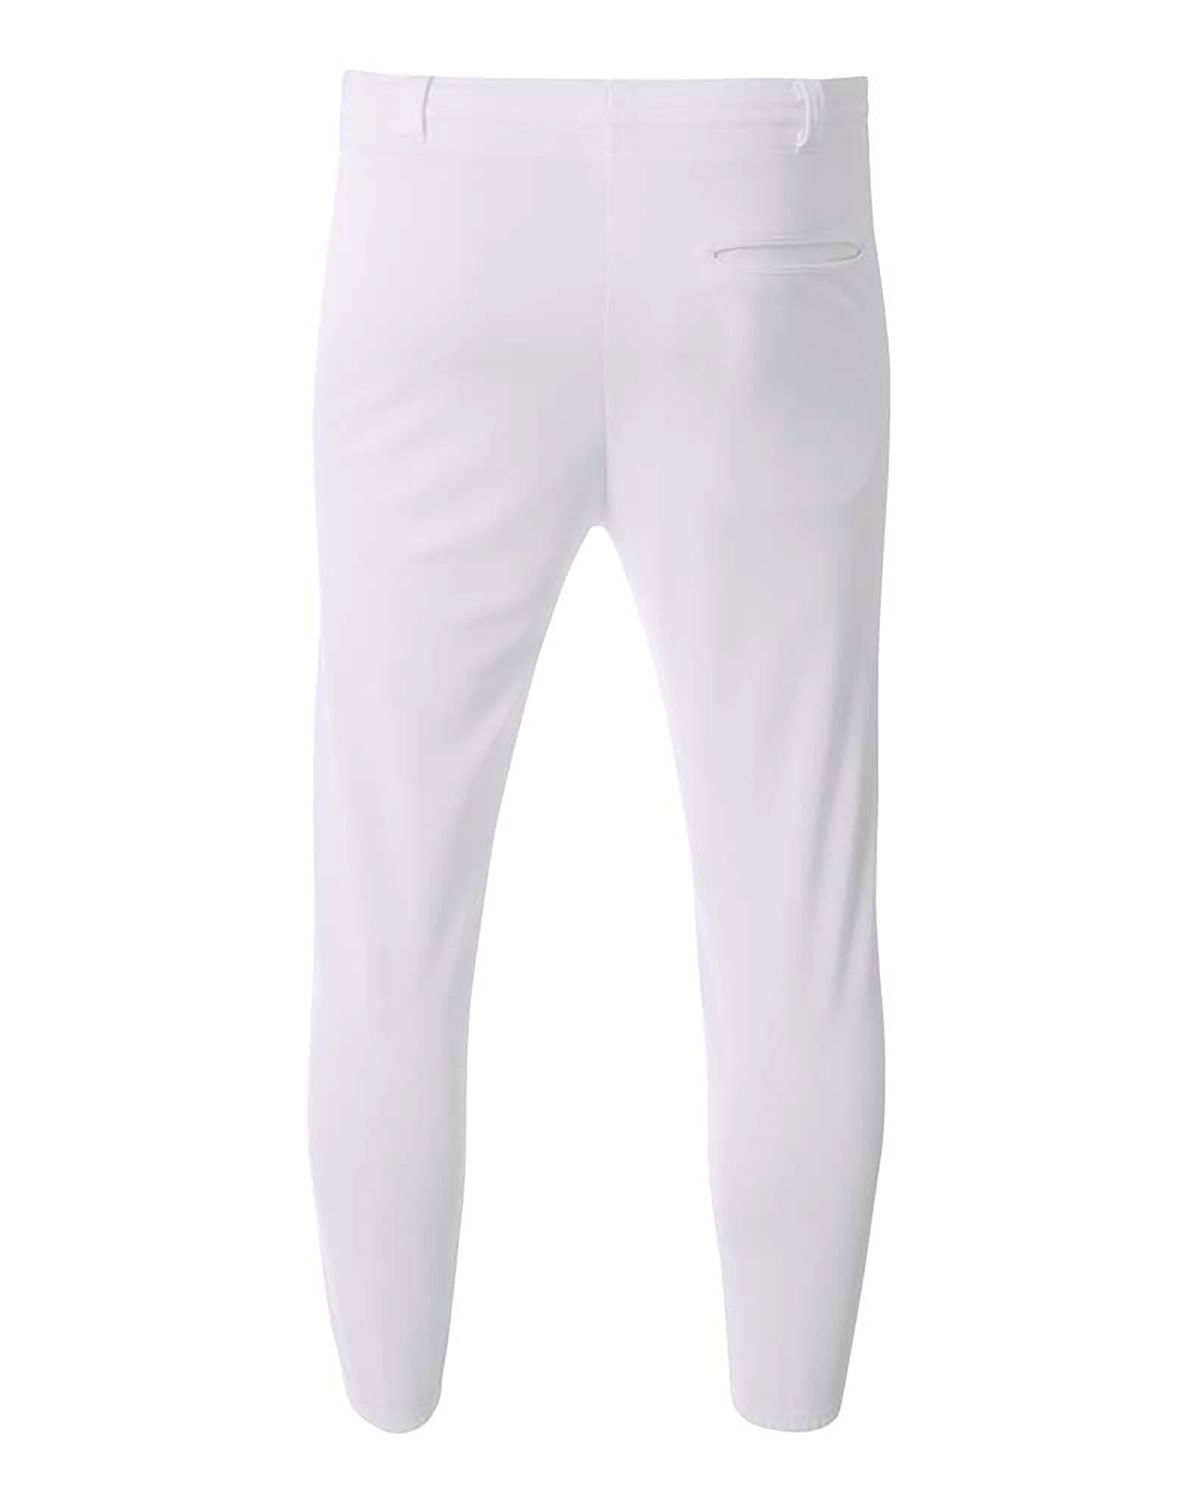 'A4 NB6195 Youth Double Play Polyester Elastic Waist With Belt Loops Baseball Pant'